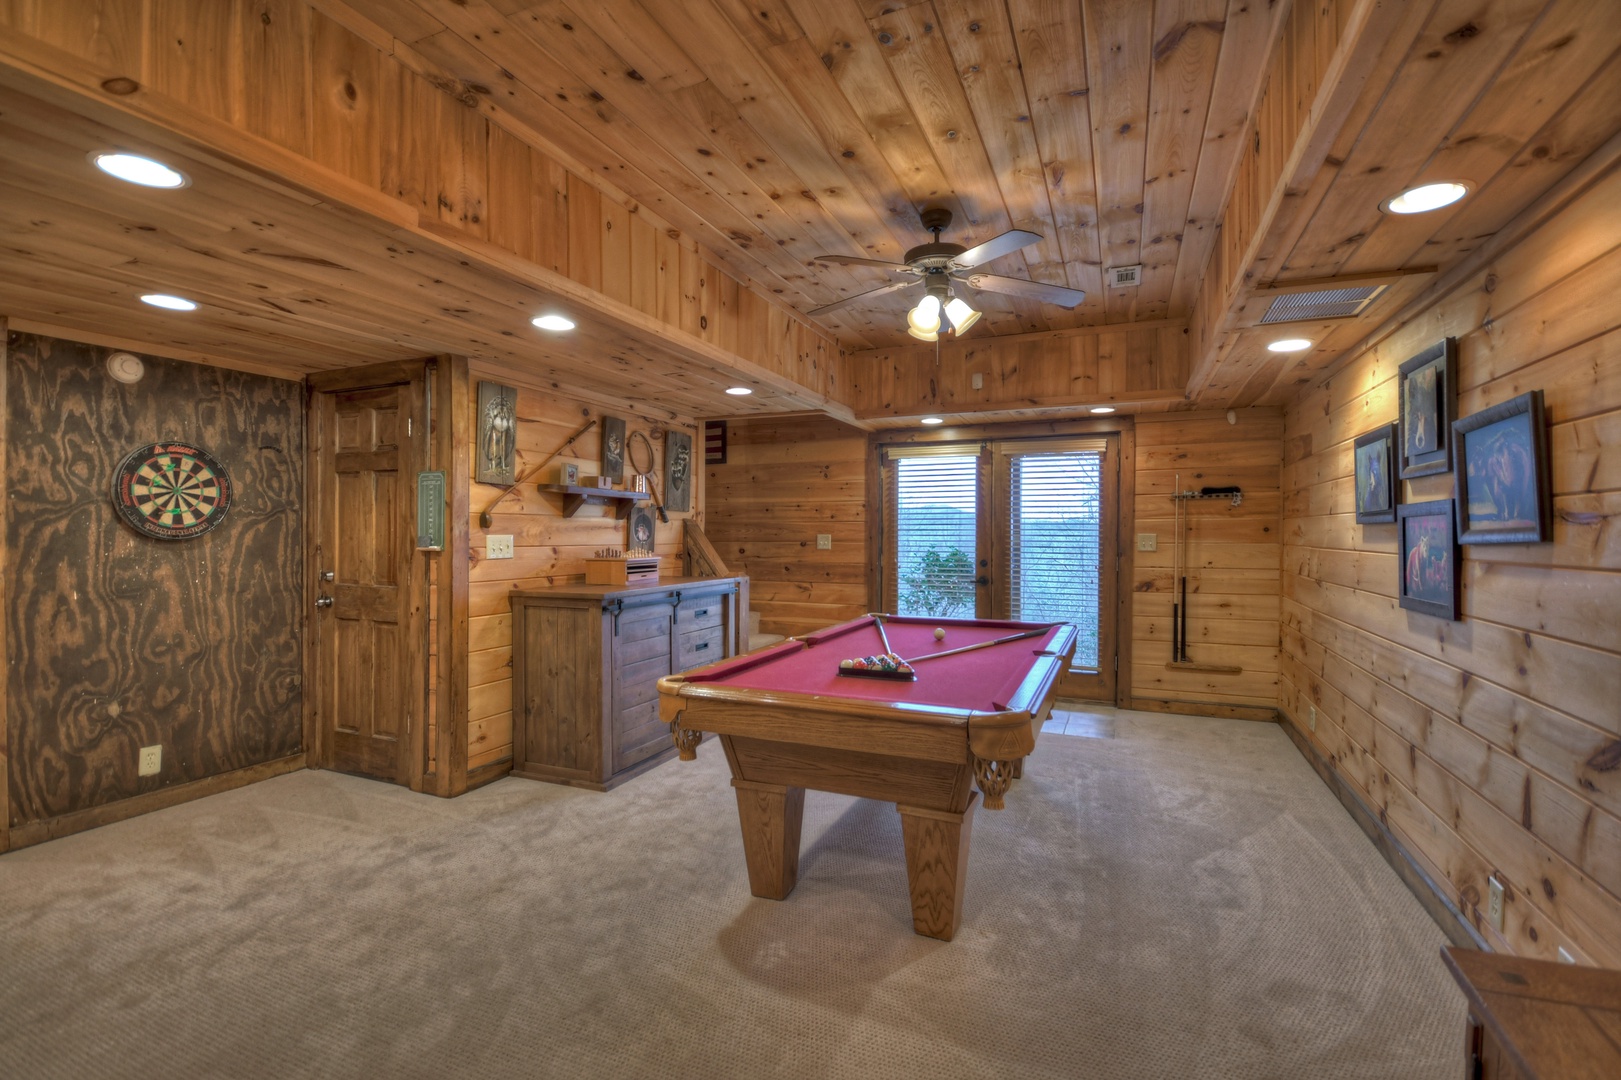 Silent In The Morning- Pool table & dart board with lower level game area